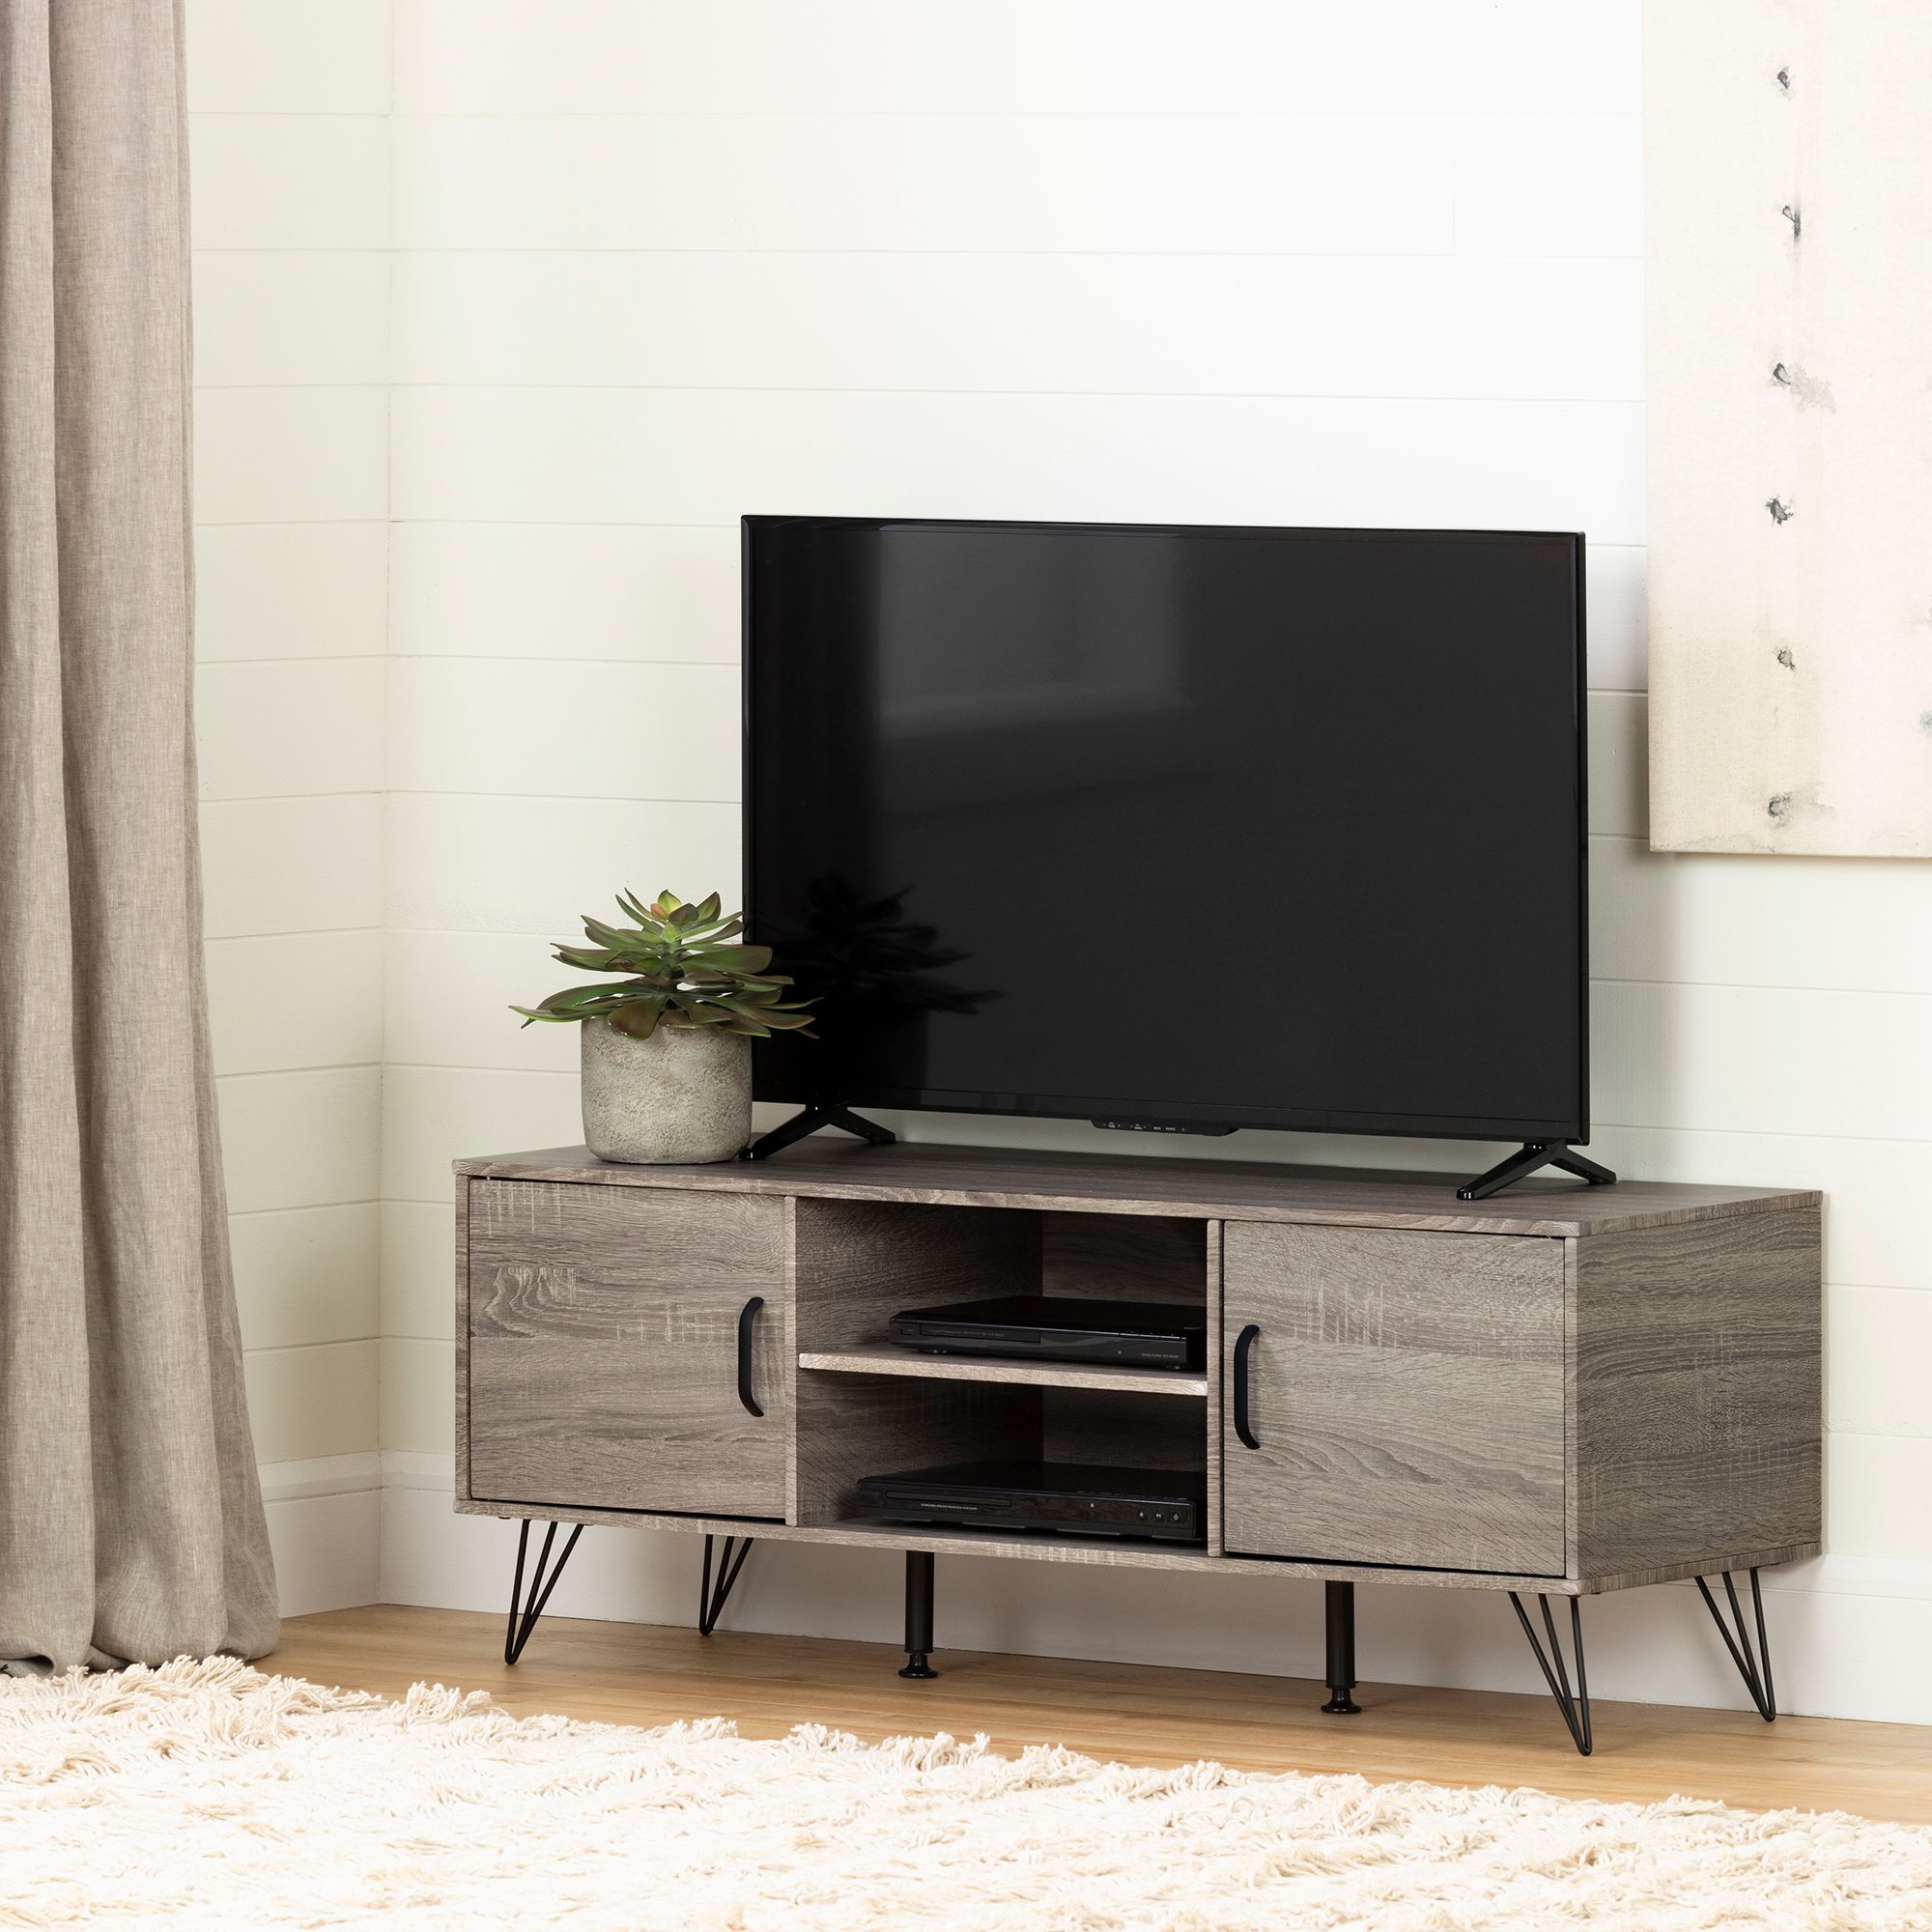 South Shore Evane Tv Stand With Doors For Tvs Up To 55 With South Shore Evane Tv Stands With Doors In Oak Camel (View 2 of 15)